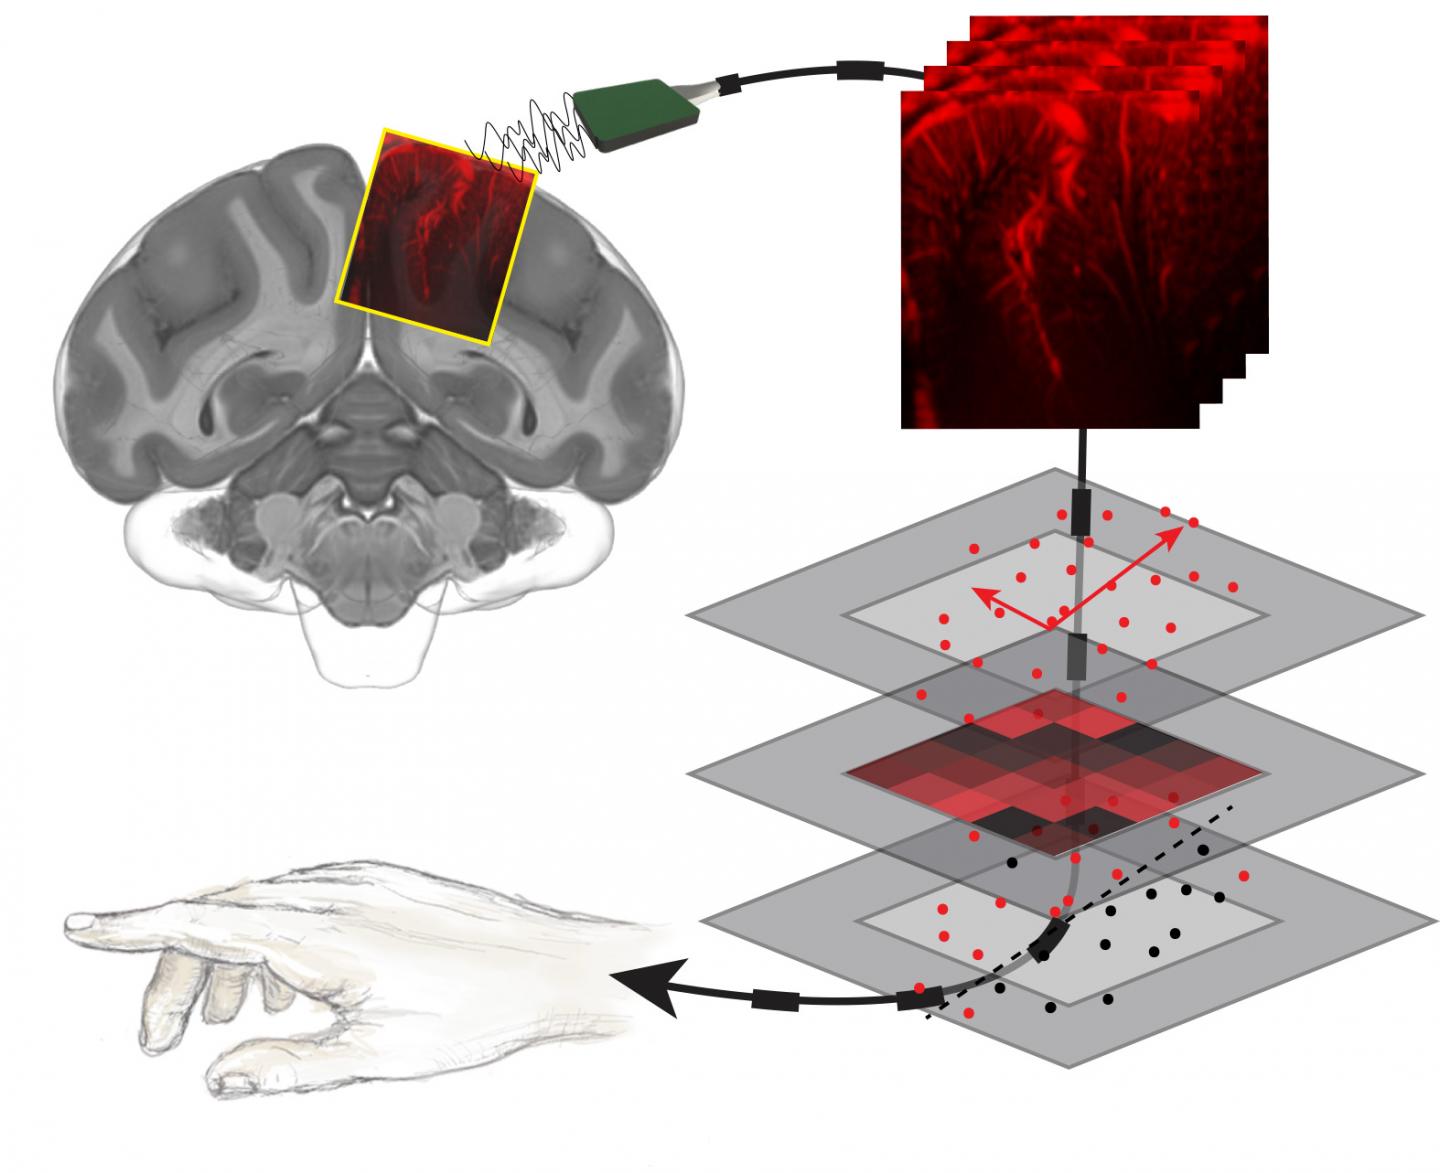 From brain imaging to predicting movement